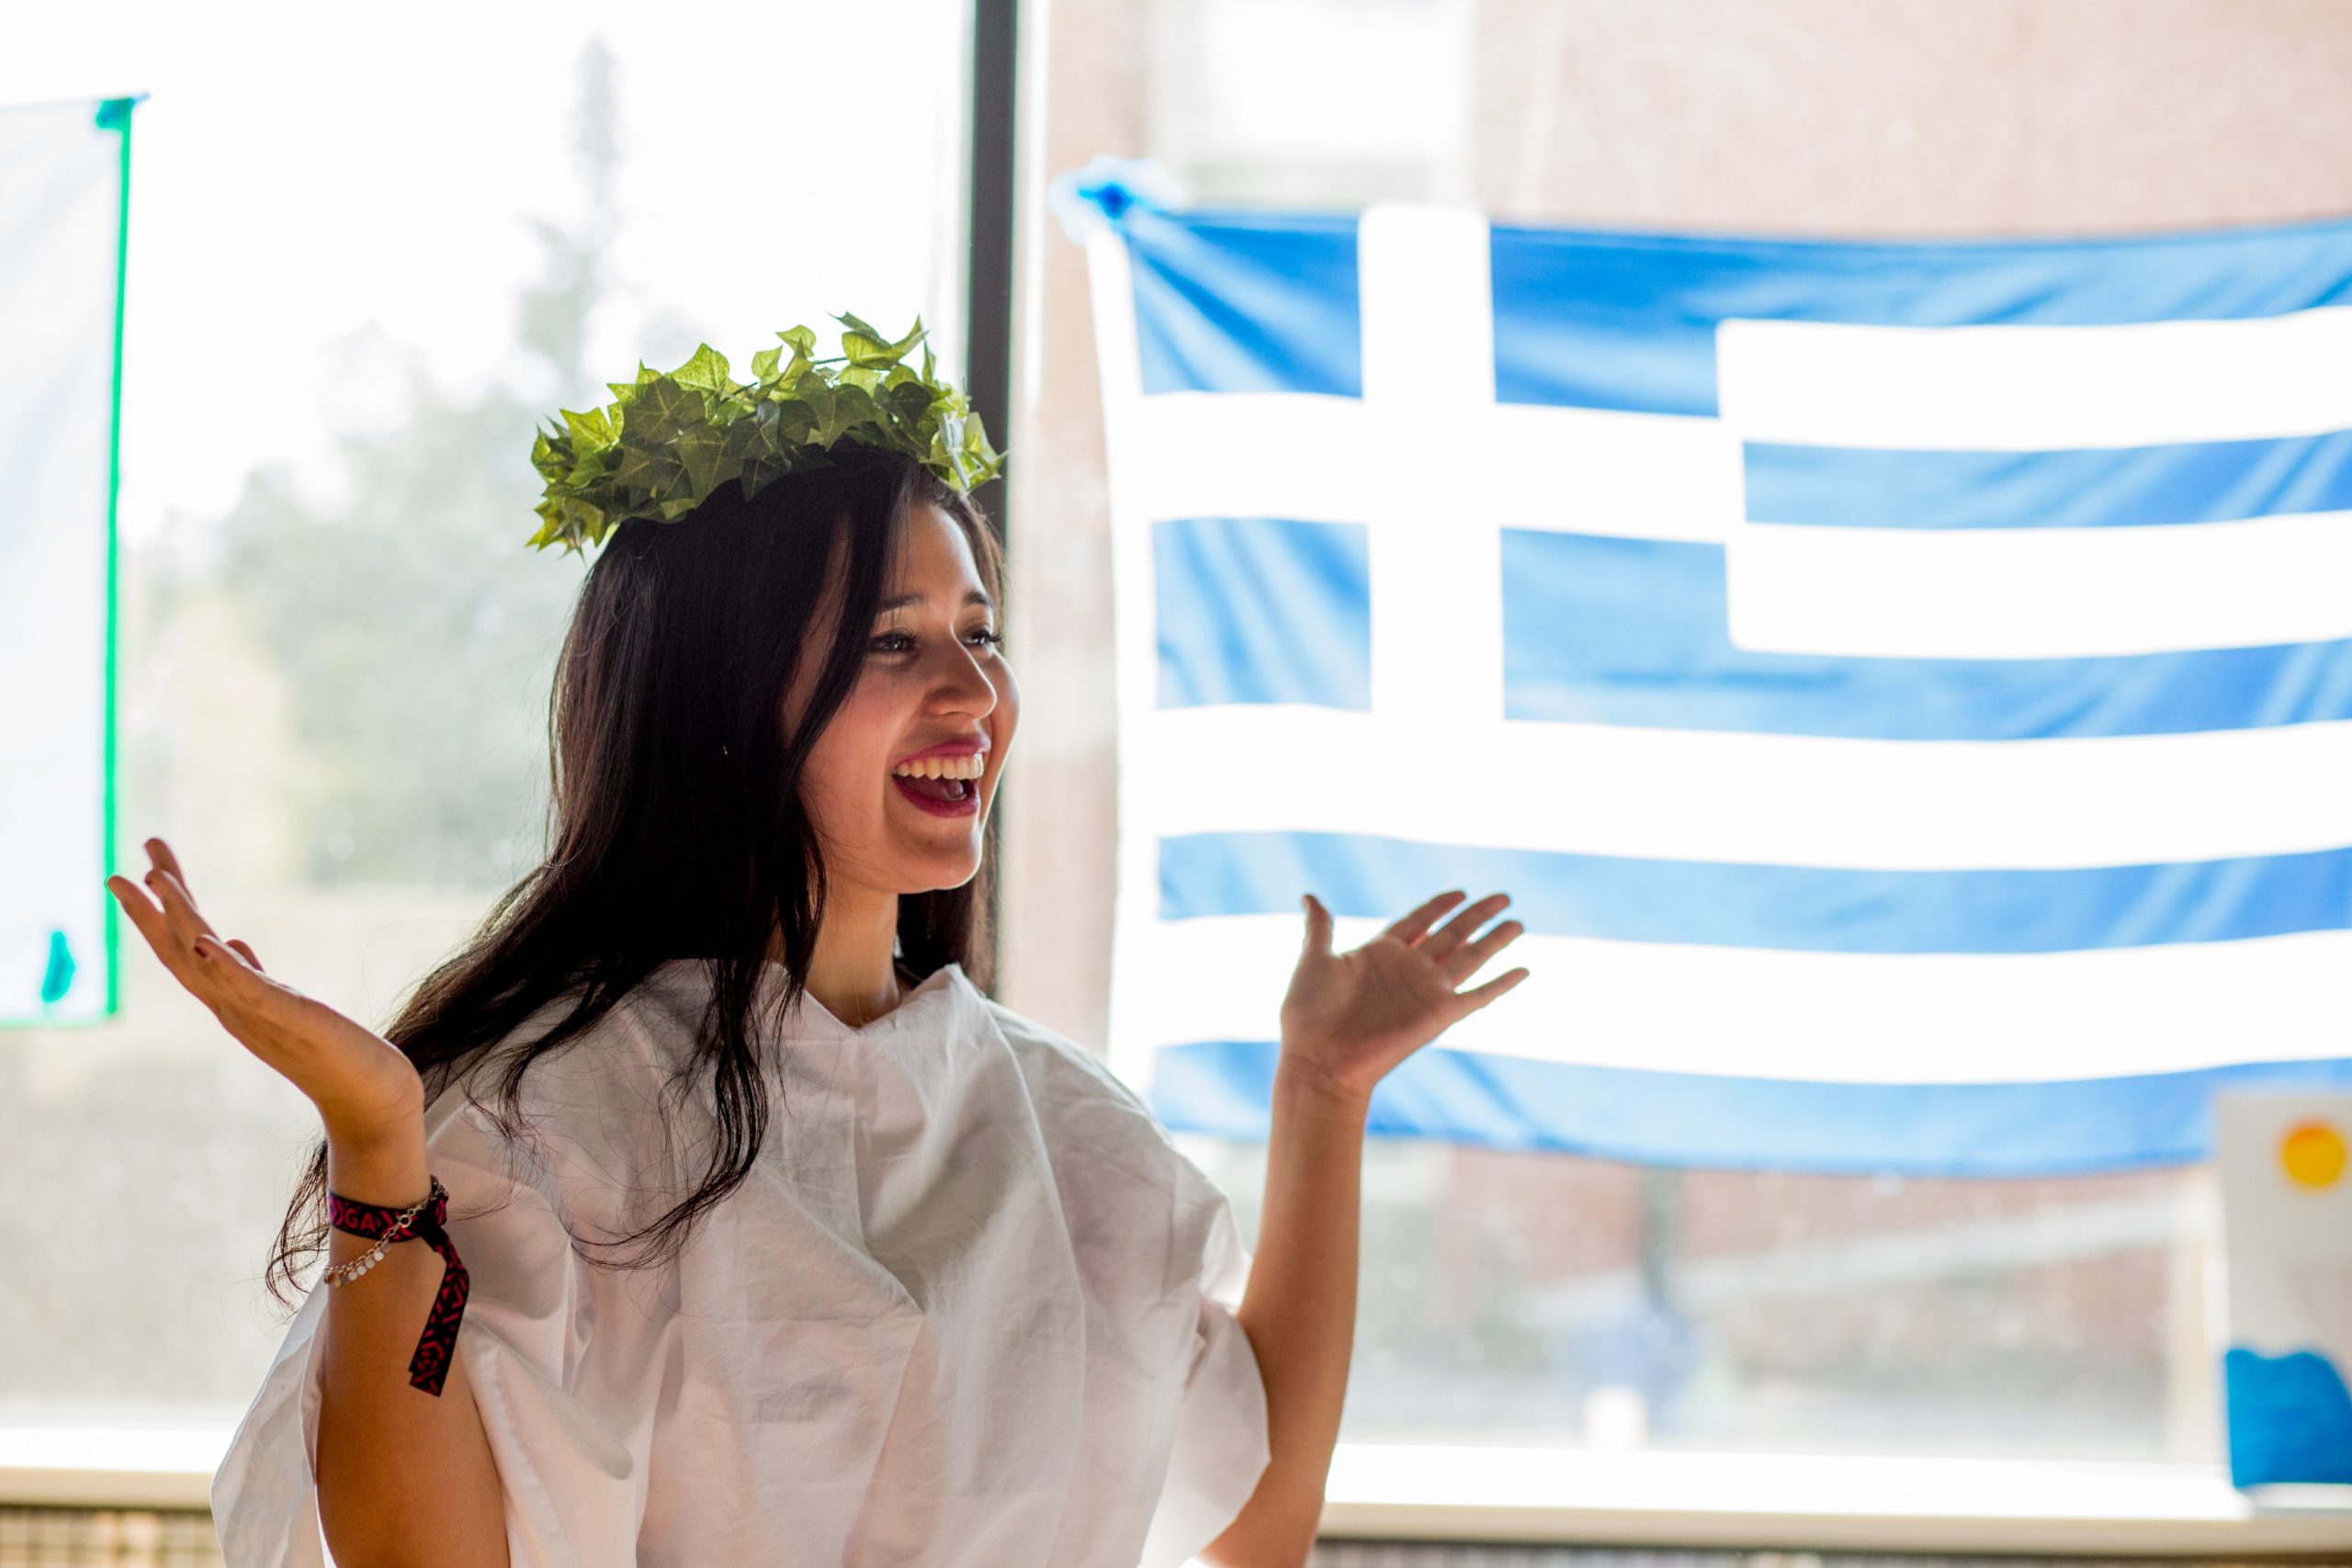 Student dressed in traditional Greek attire at international festival.